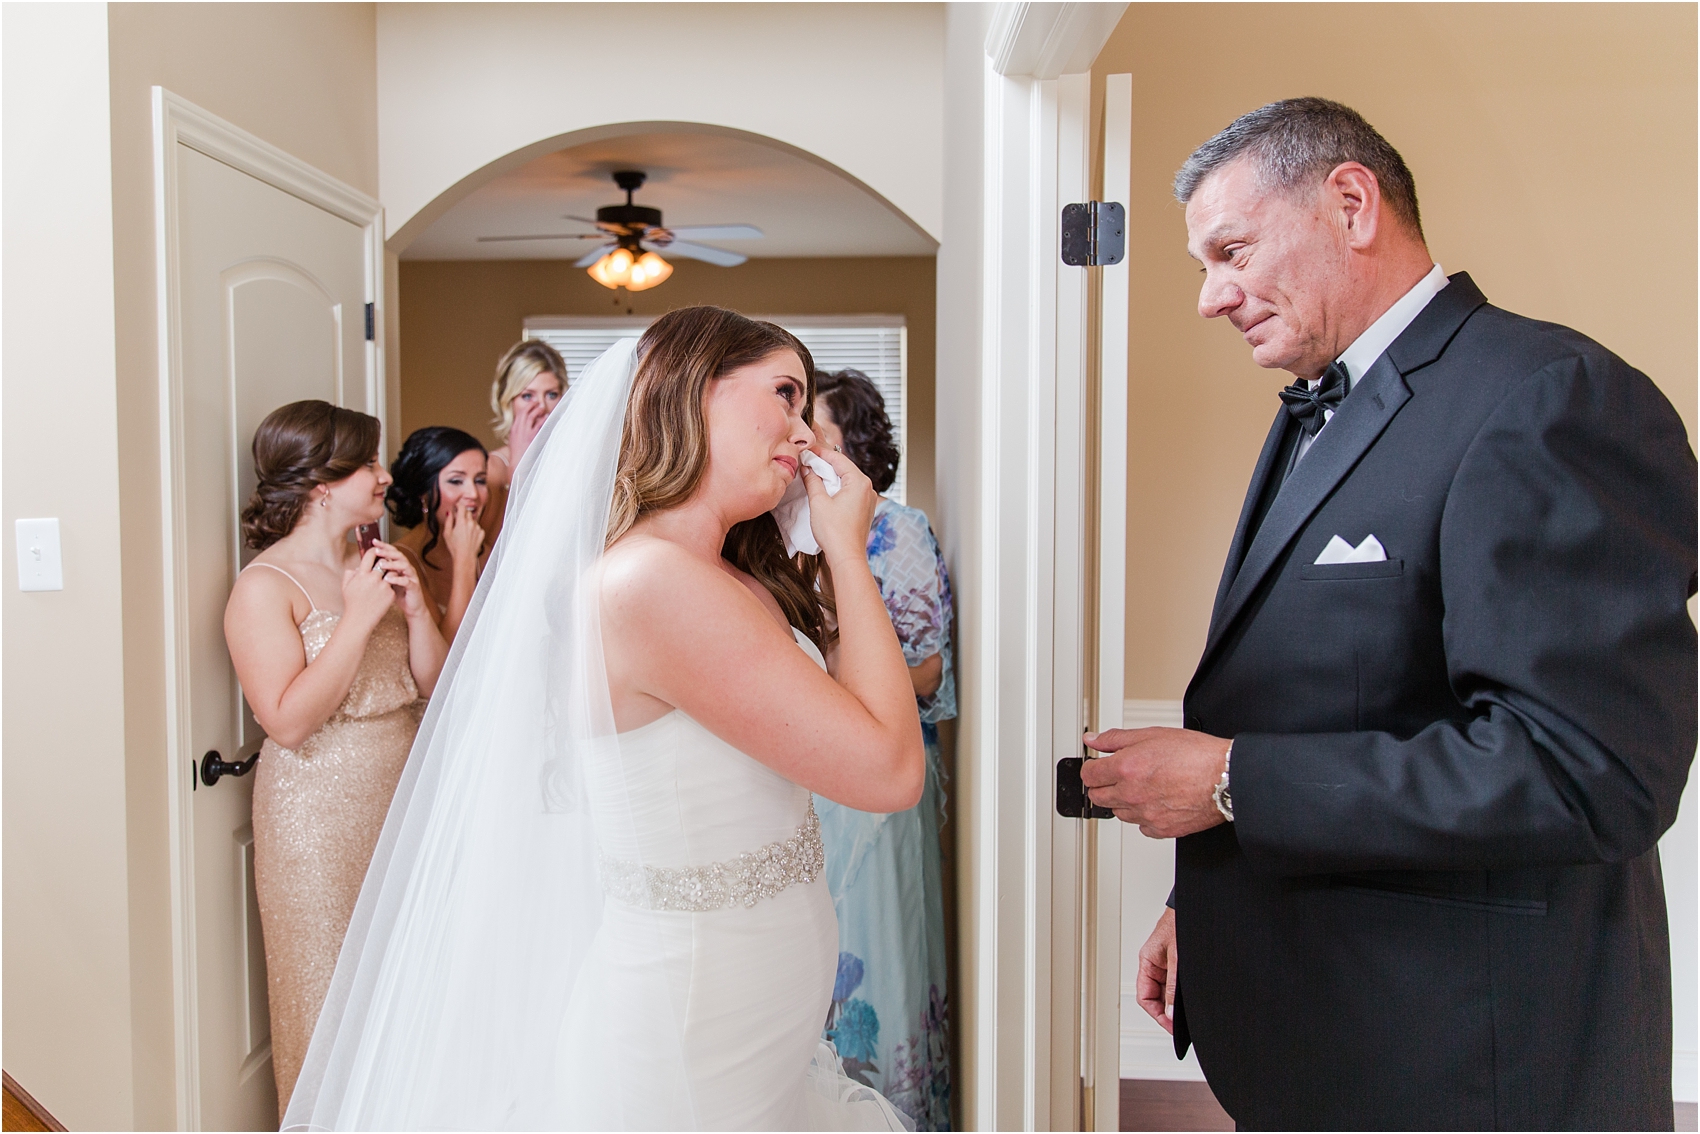 father-and-bride-share-emotional-first-look-on-wedding-day-photos-in-detroit-michigan-by-courtney-carolyn-photography_0017.jpg